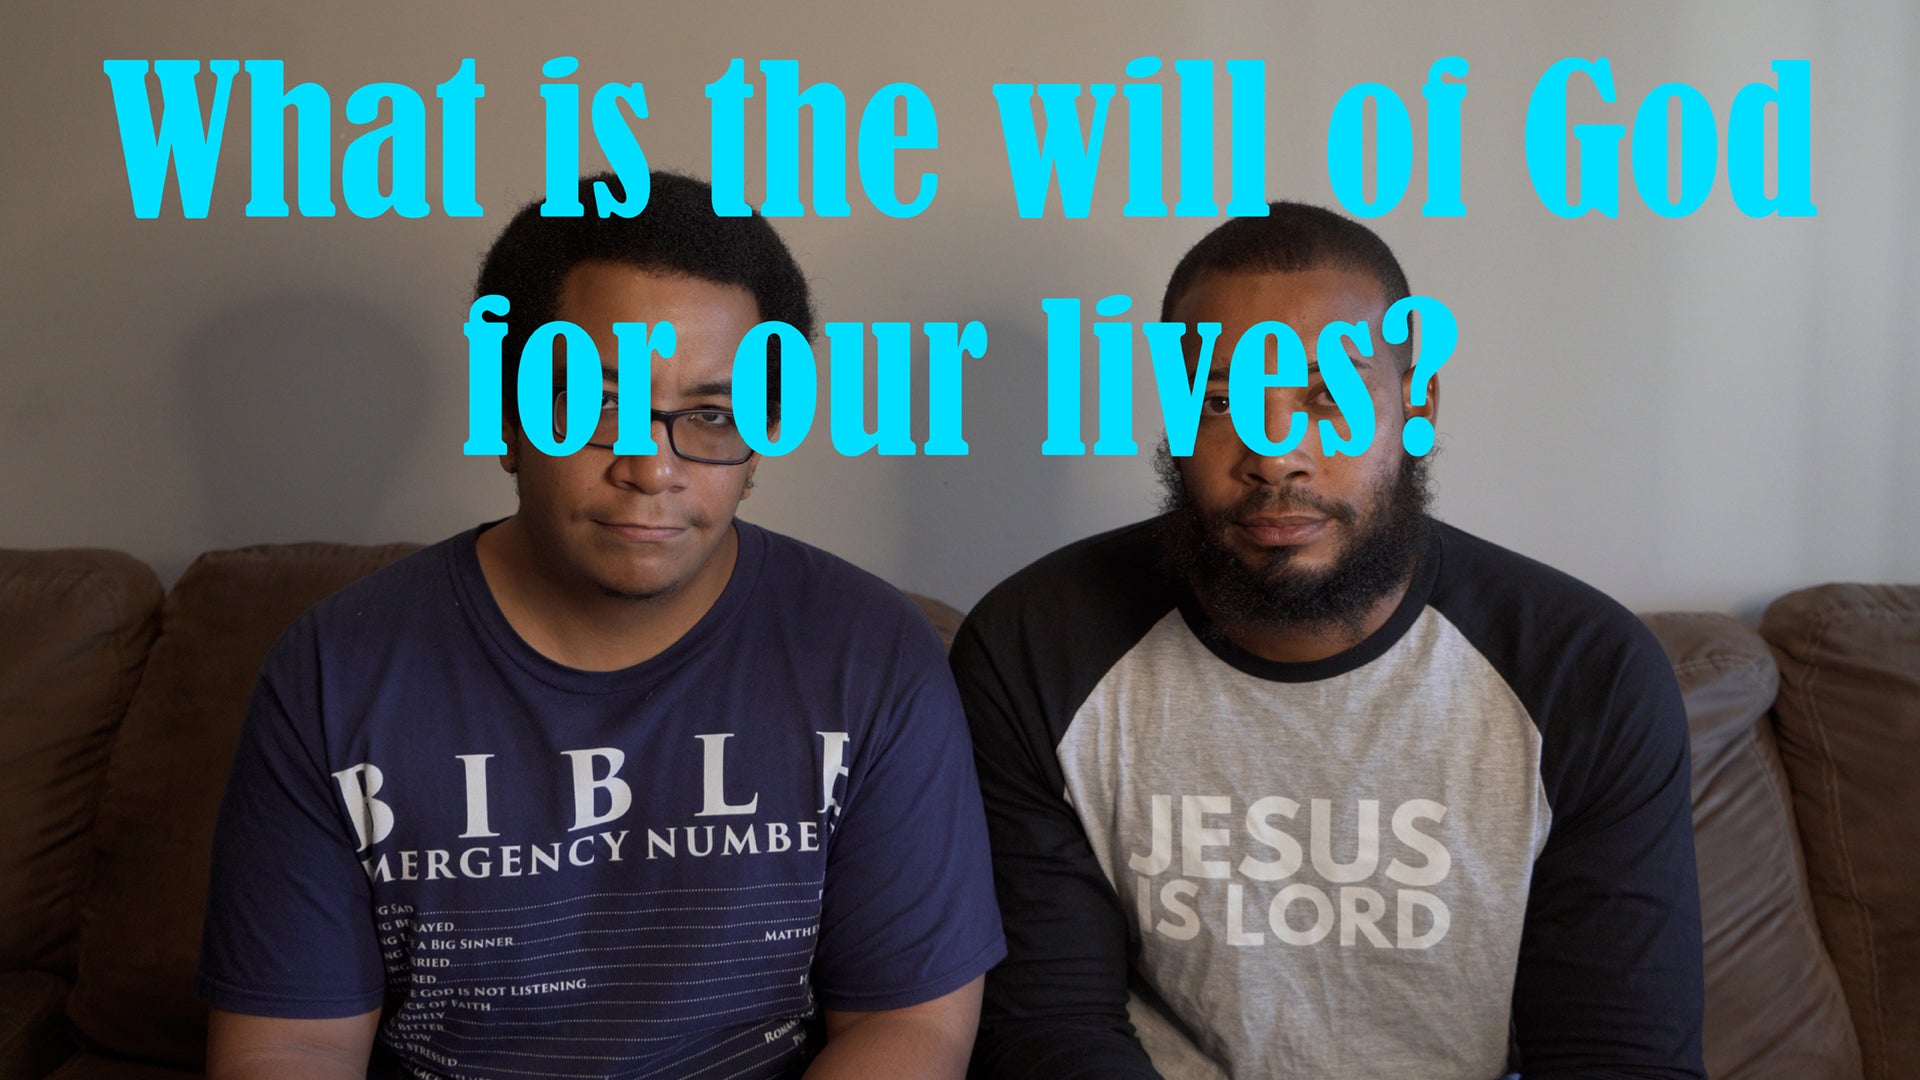 Load video: What is the will of God for our lives?